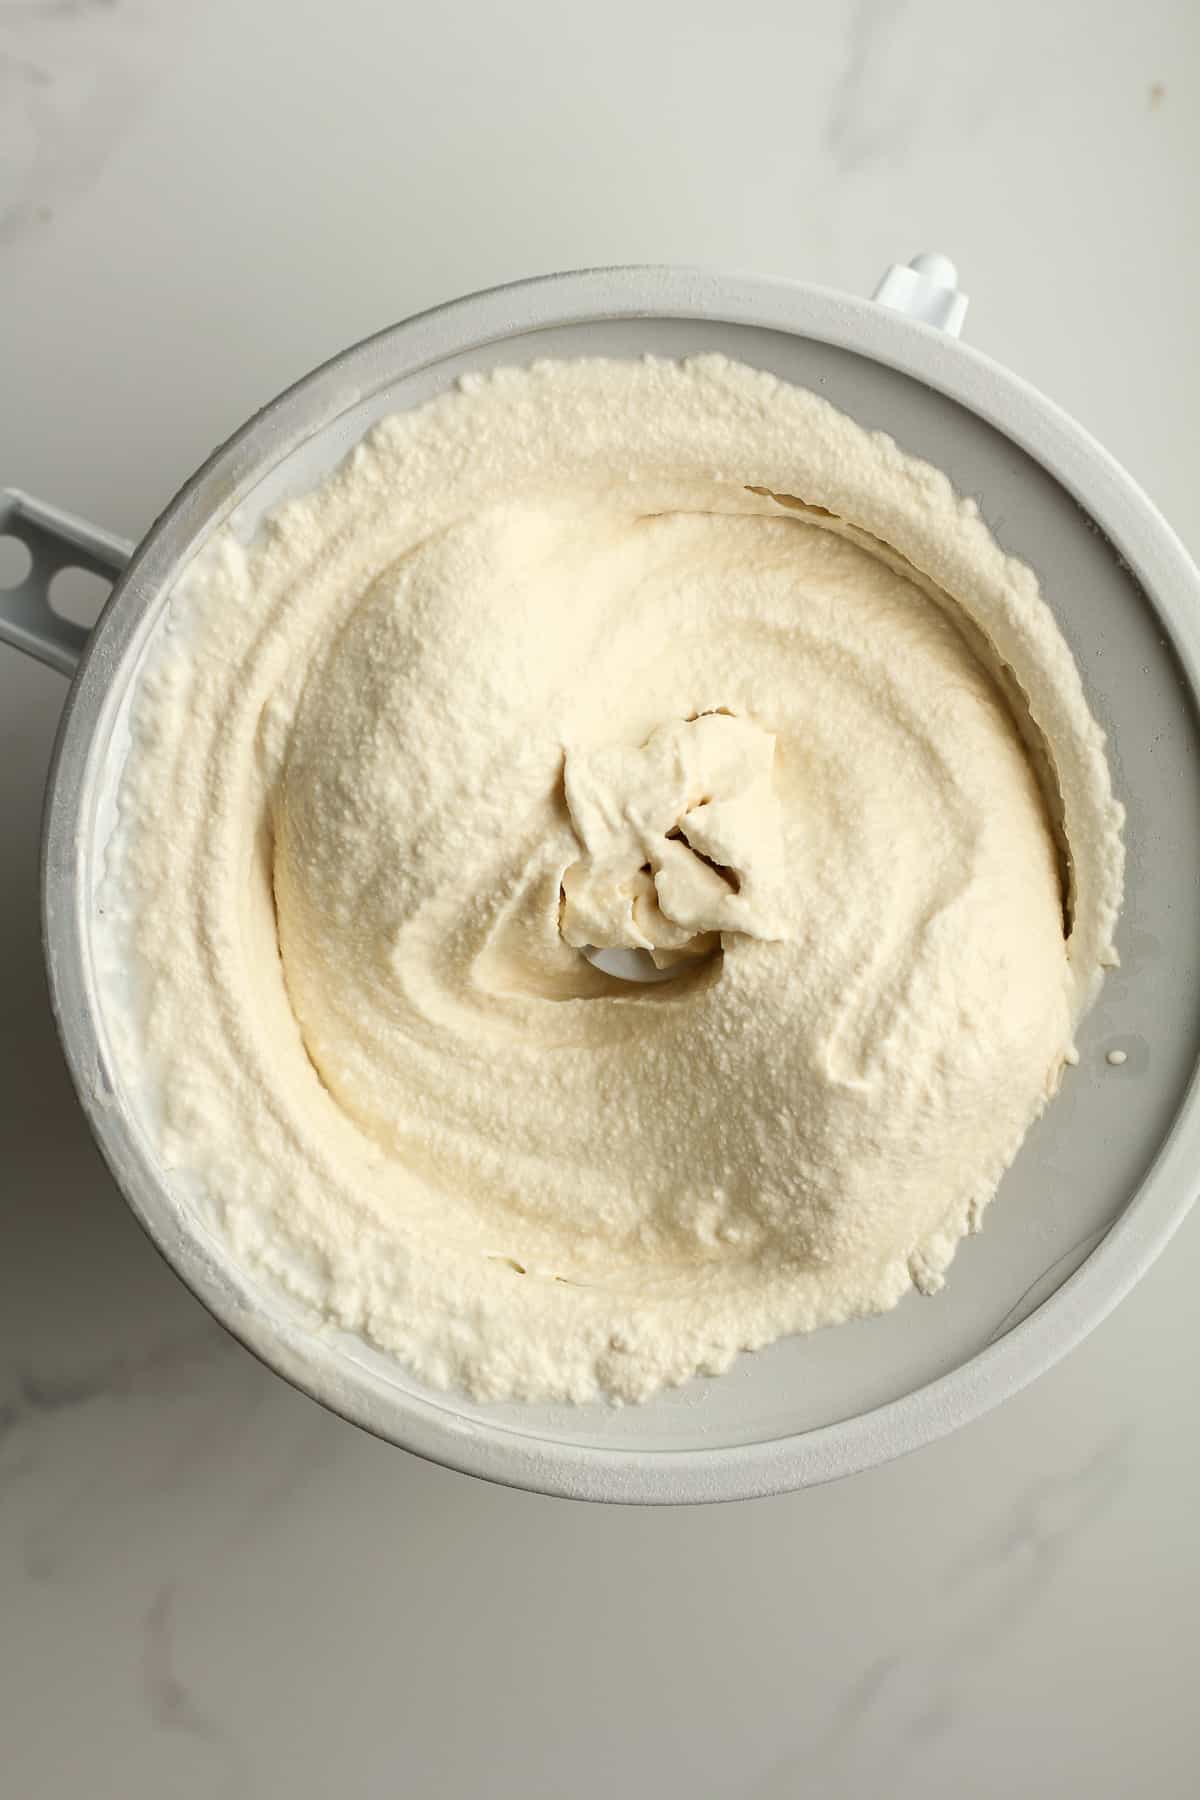 A KitchenAid attachment with the ice cream inside after churning.